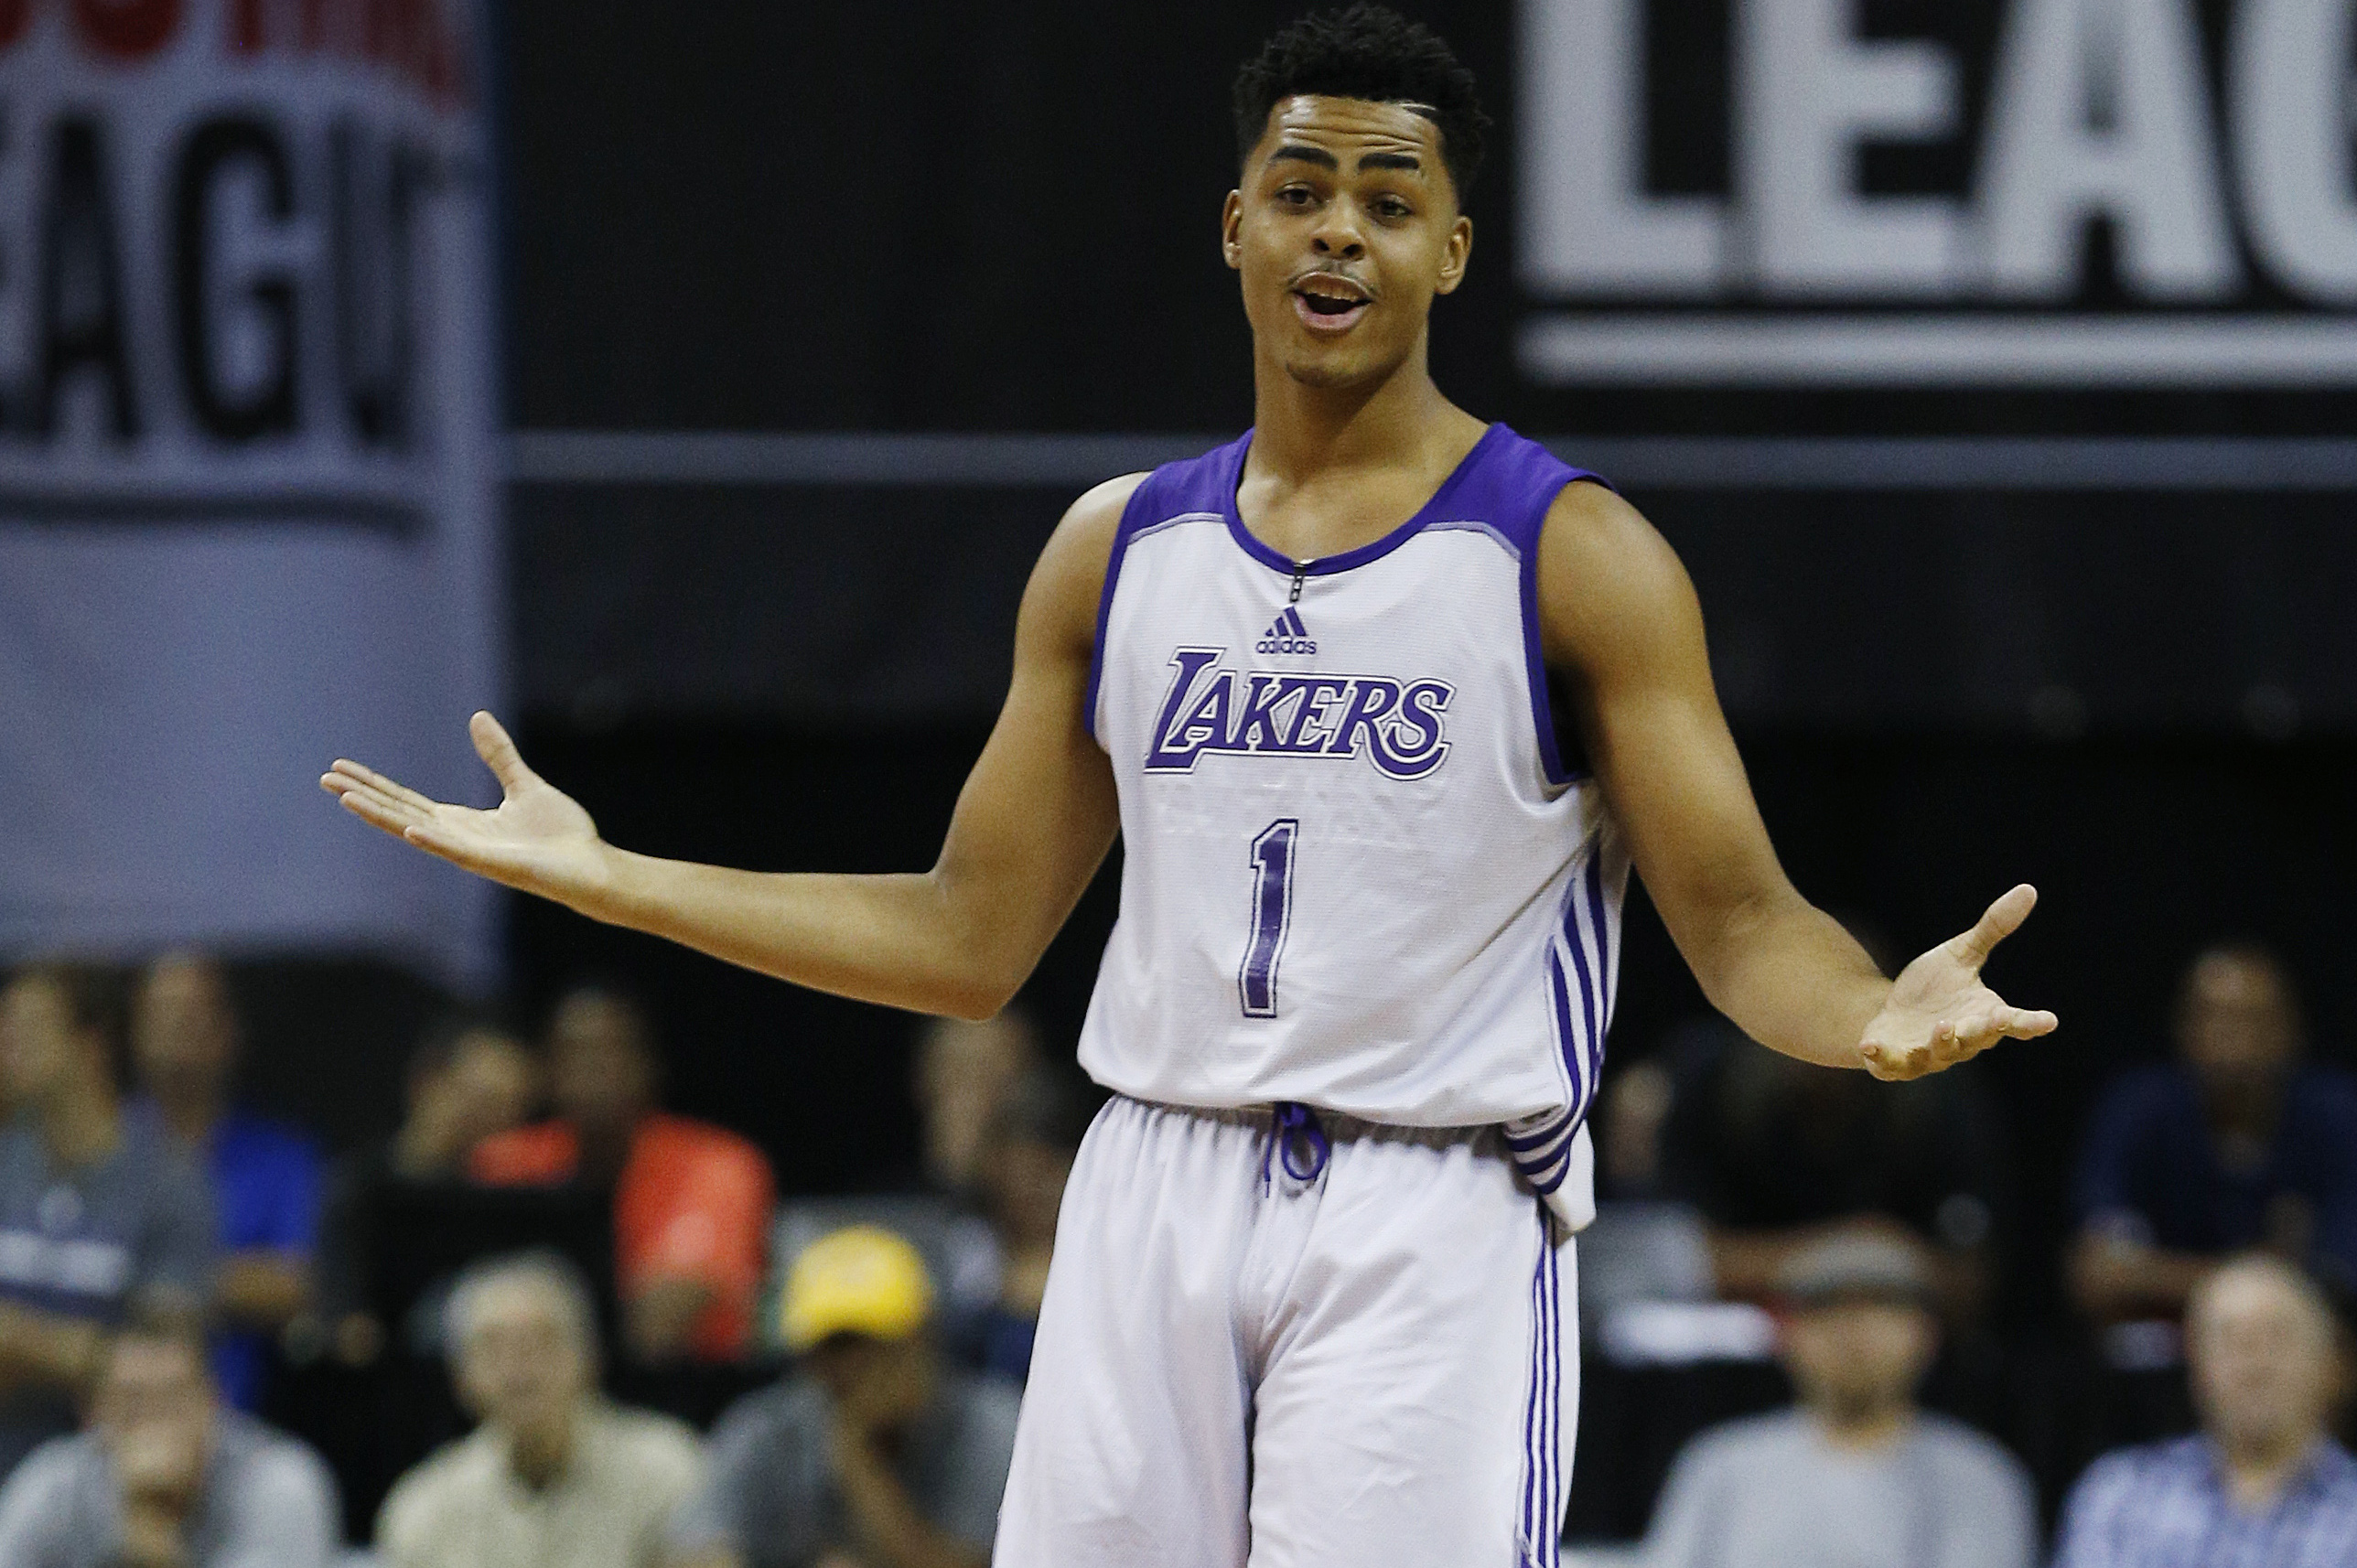 Lakers News: D'Angelo Russell Goes Off on Fans for Disrespect